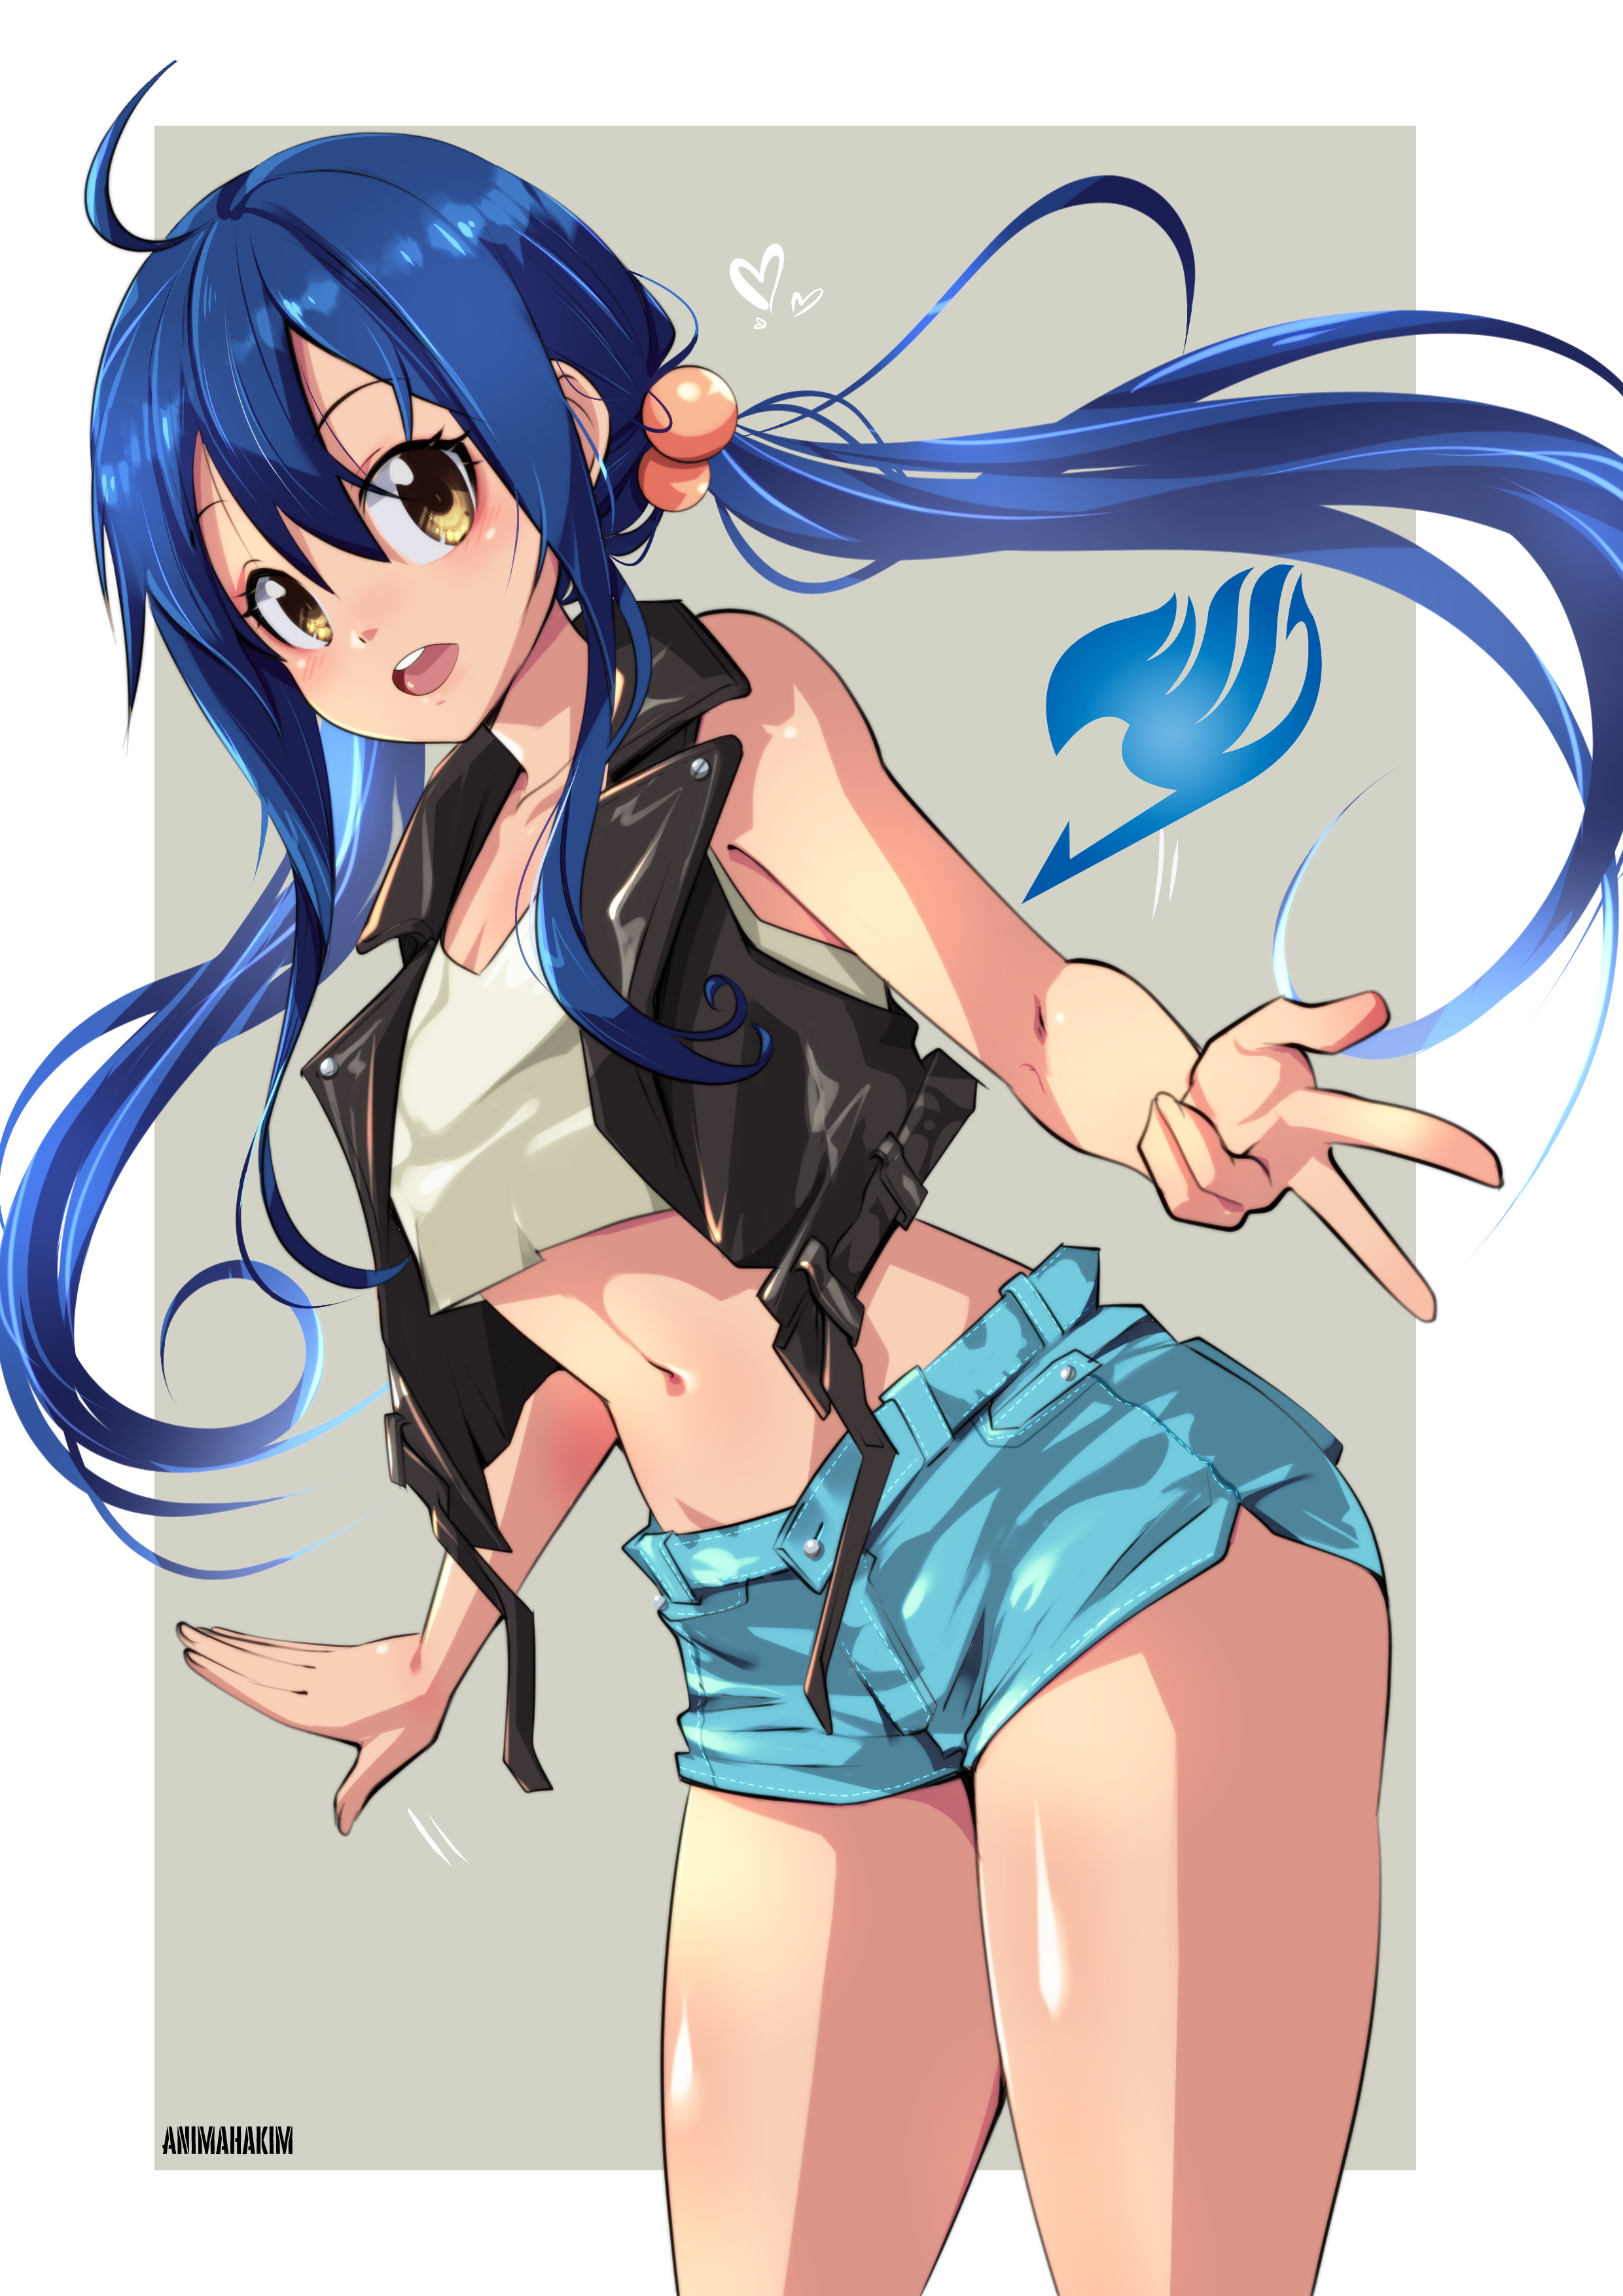 Fairy Tail Poster Anime Wendy Marvell Art Picture Home Decor Wall Scroll  60*90CM | eBay